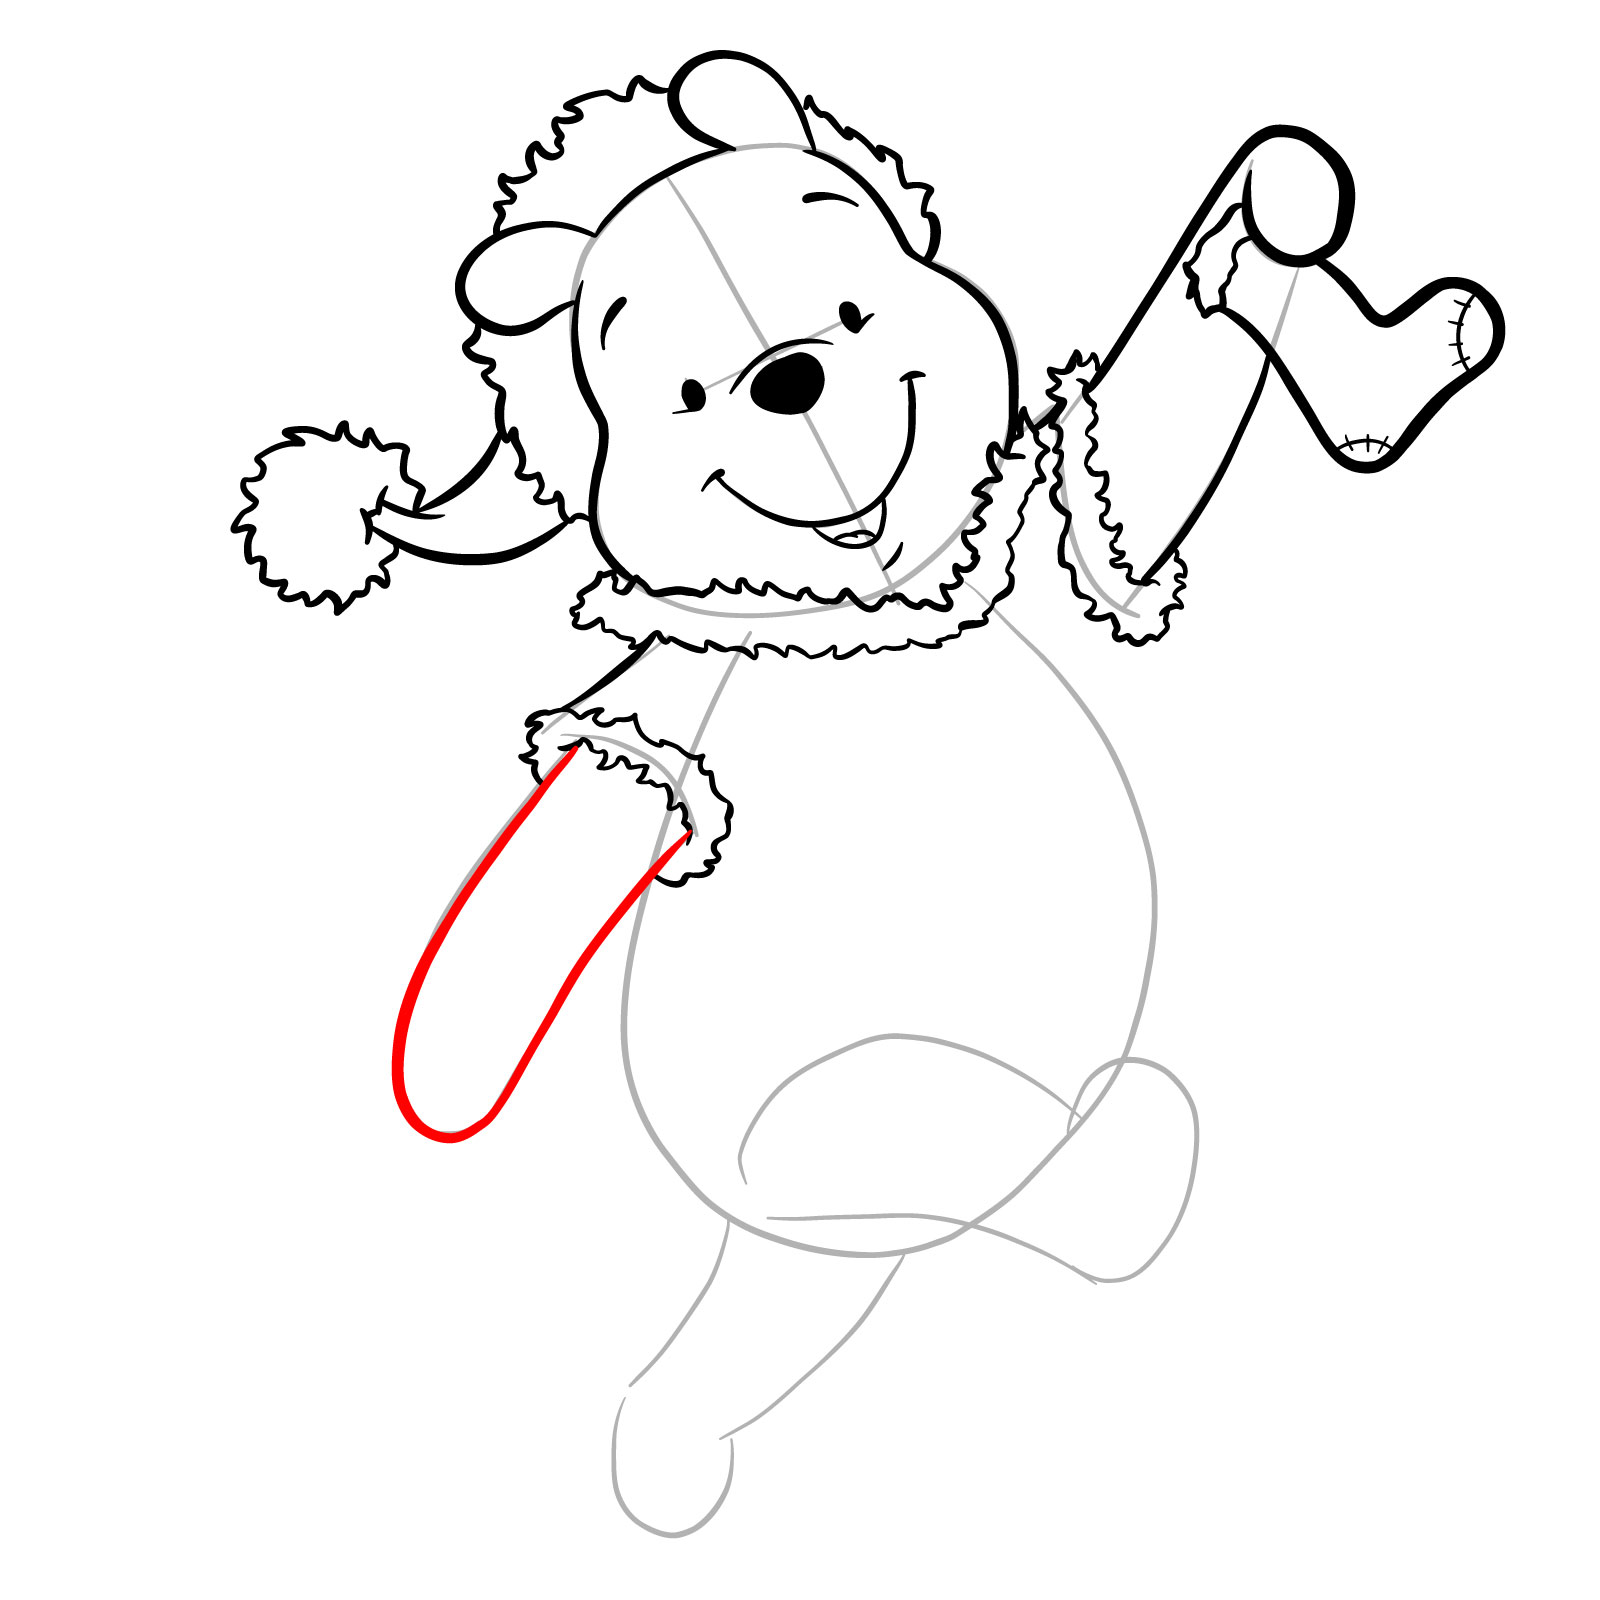 How to draw Winnie-the-Pooh Christmas style - step 21